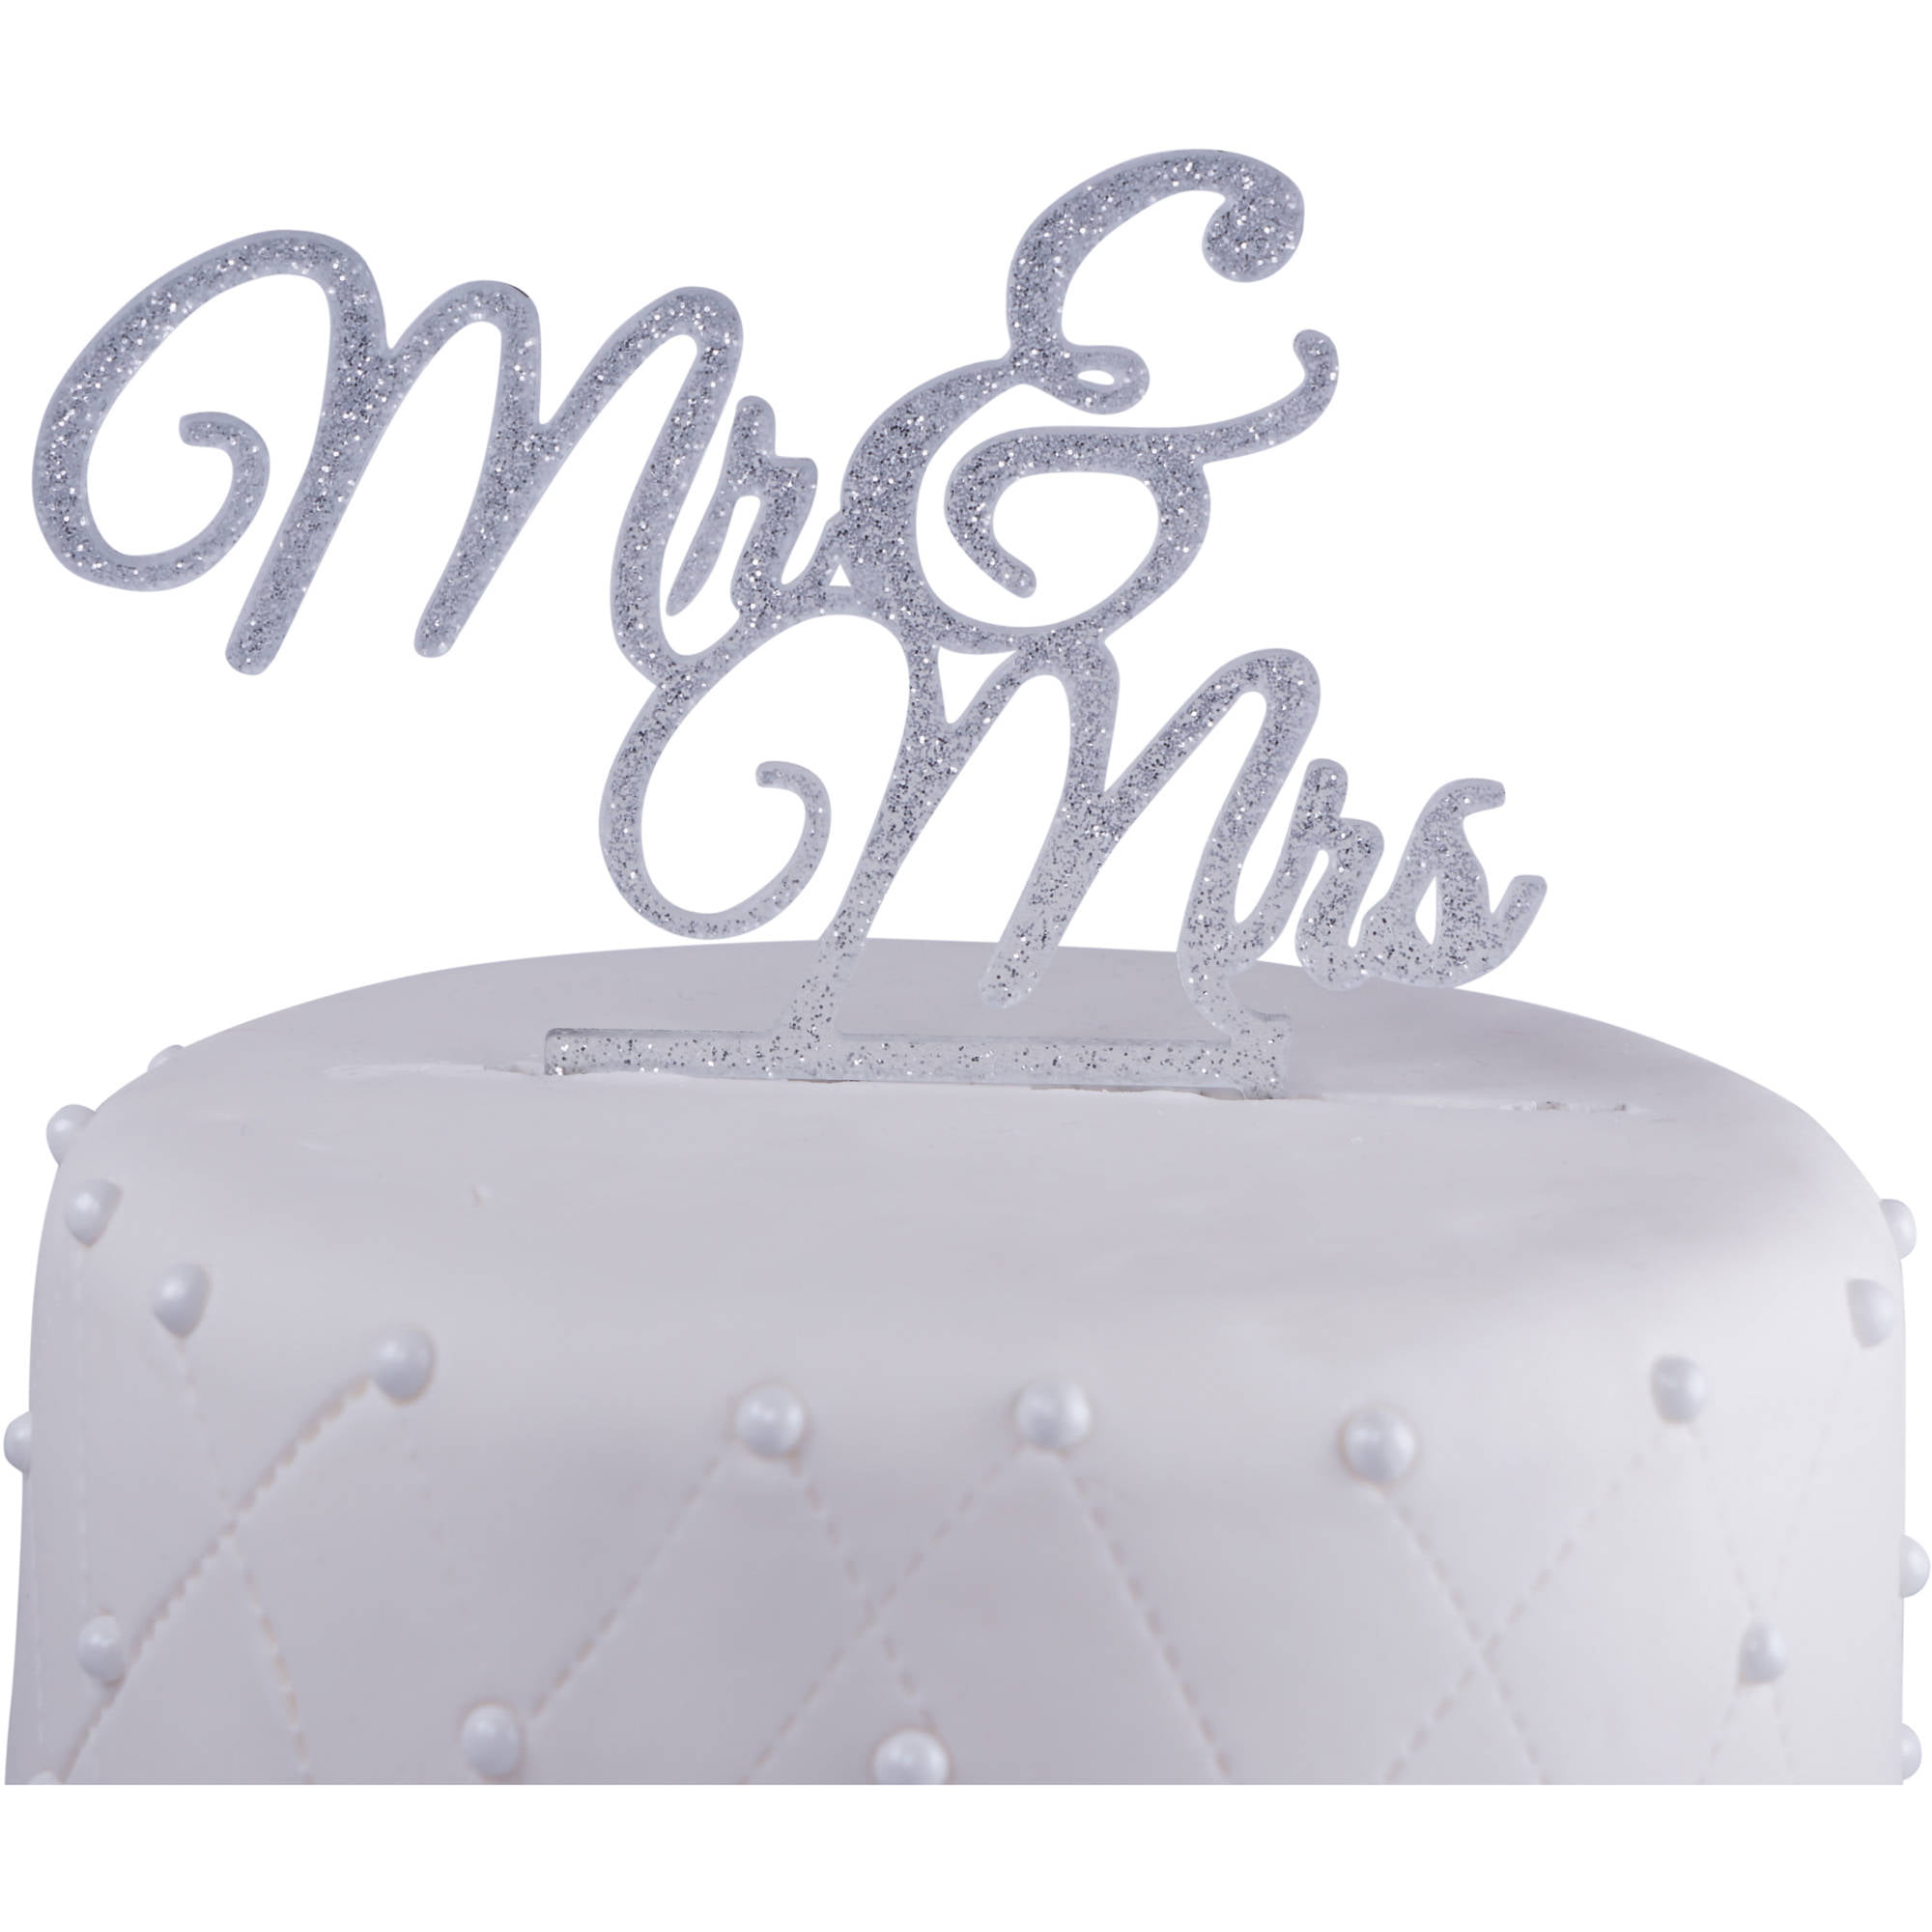 MR & MRS WEDDING CAKE TOPPER-AND-SILVER GLITTERY ACRYLIC SIGN-16X14CM-SILHOUETTE 